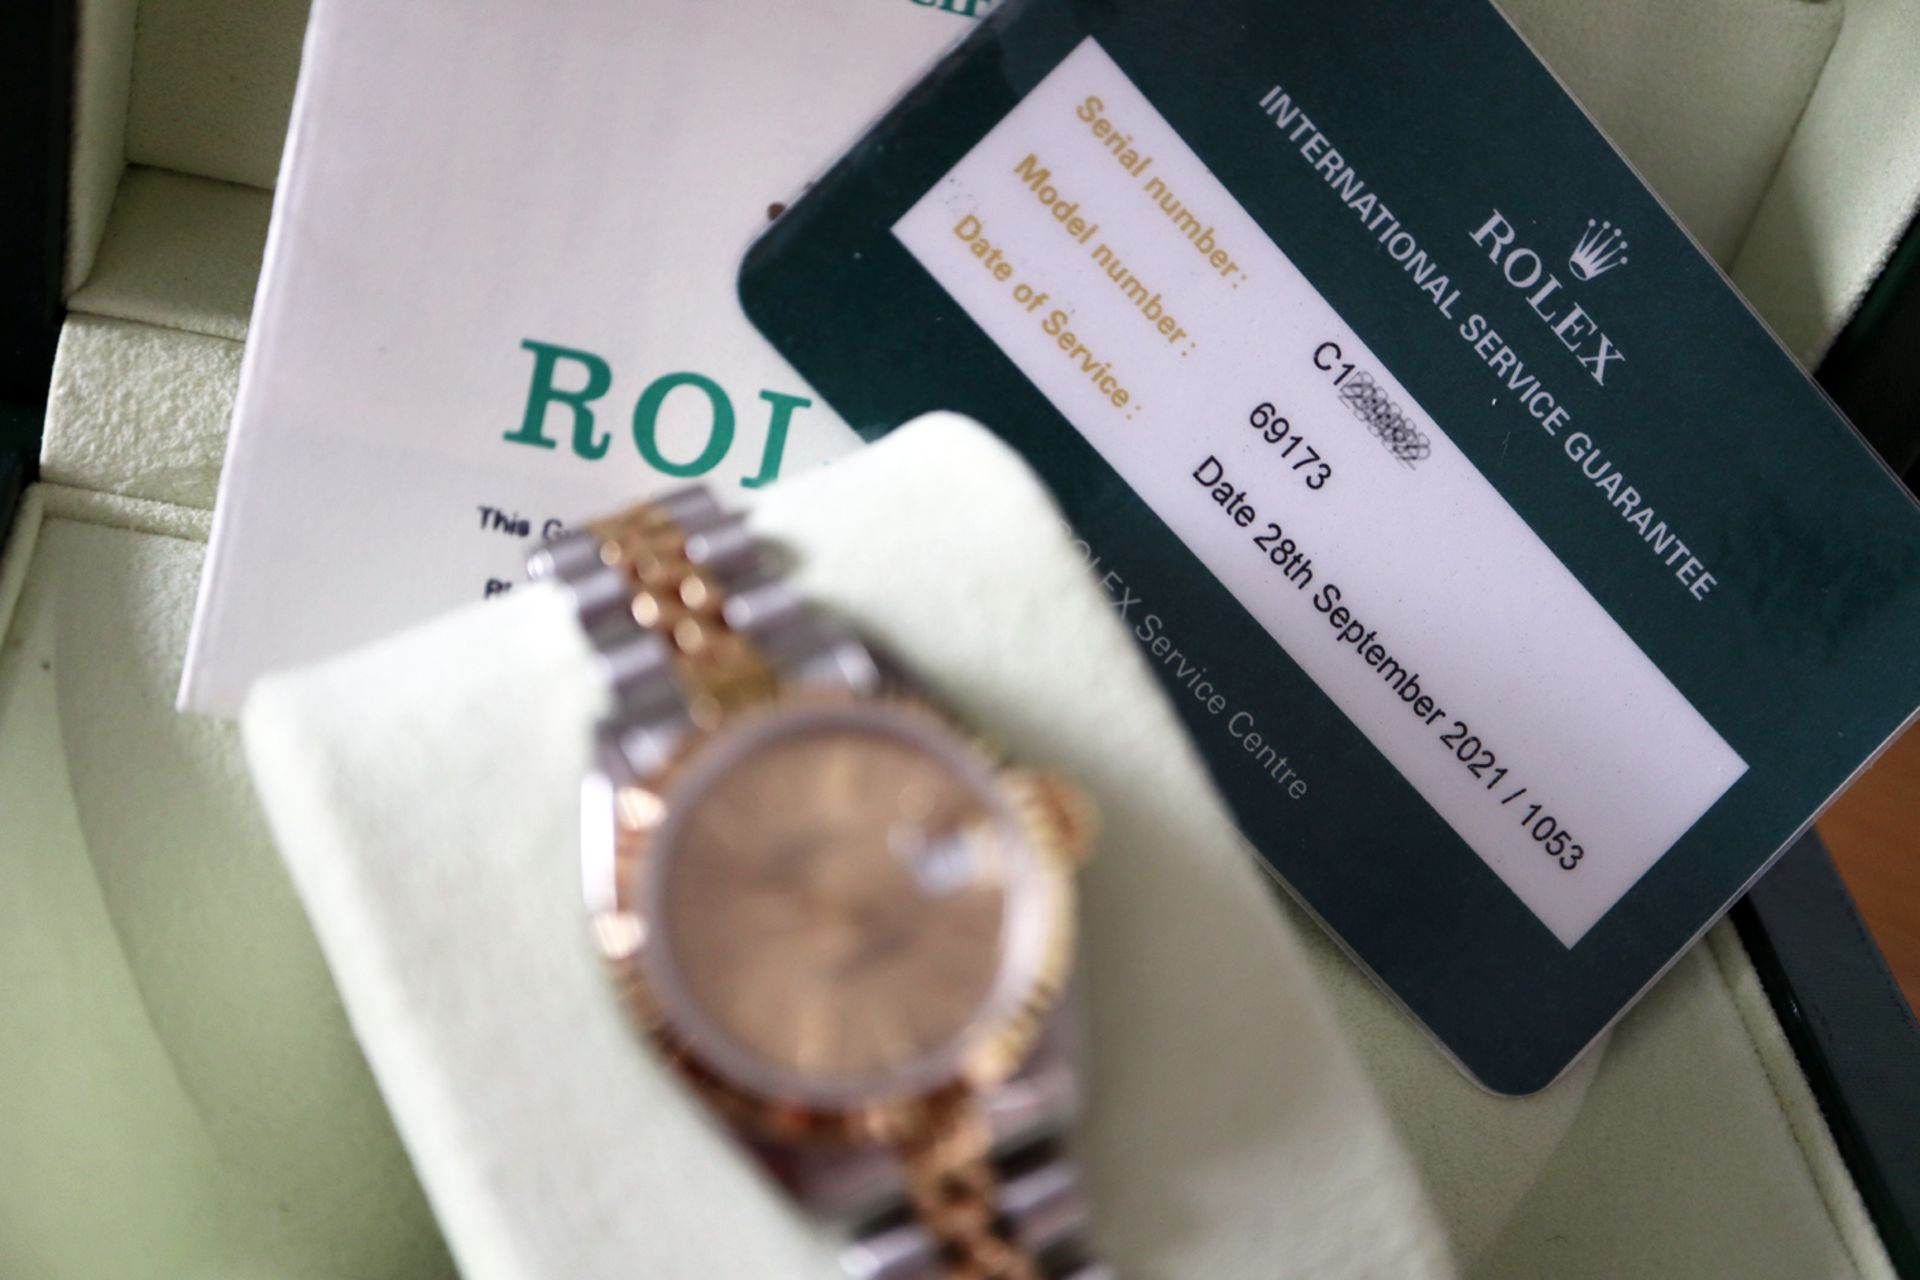 ROLEX DATEJUST 18K / STEEL REF. 69173 *CHAMPAGNE* - FULL SET WITH CERTIFICATE, BOX & TAGS ETC - Image 4 of 9